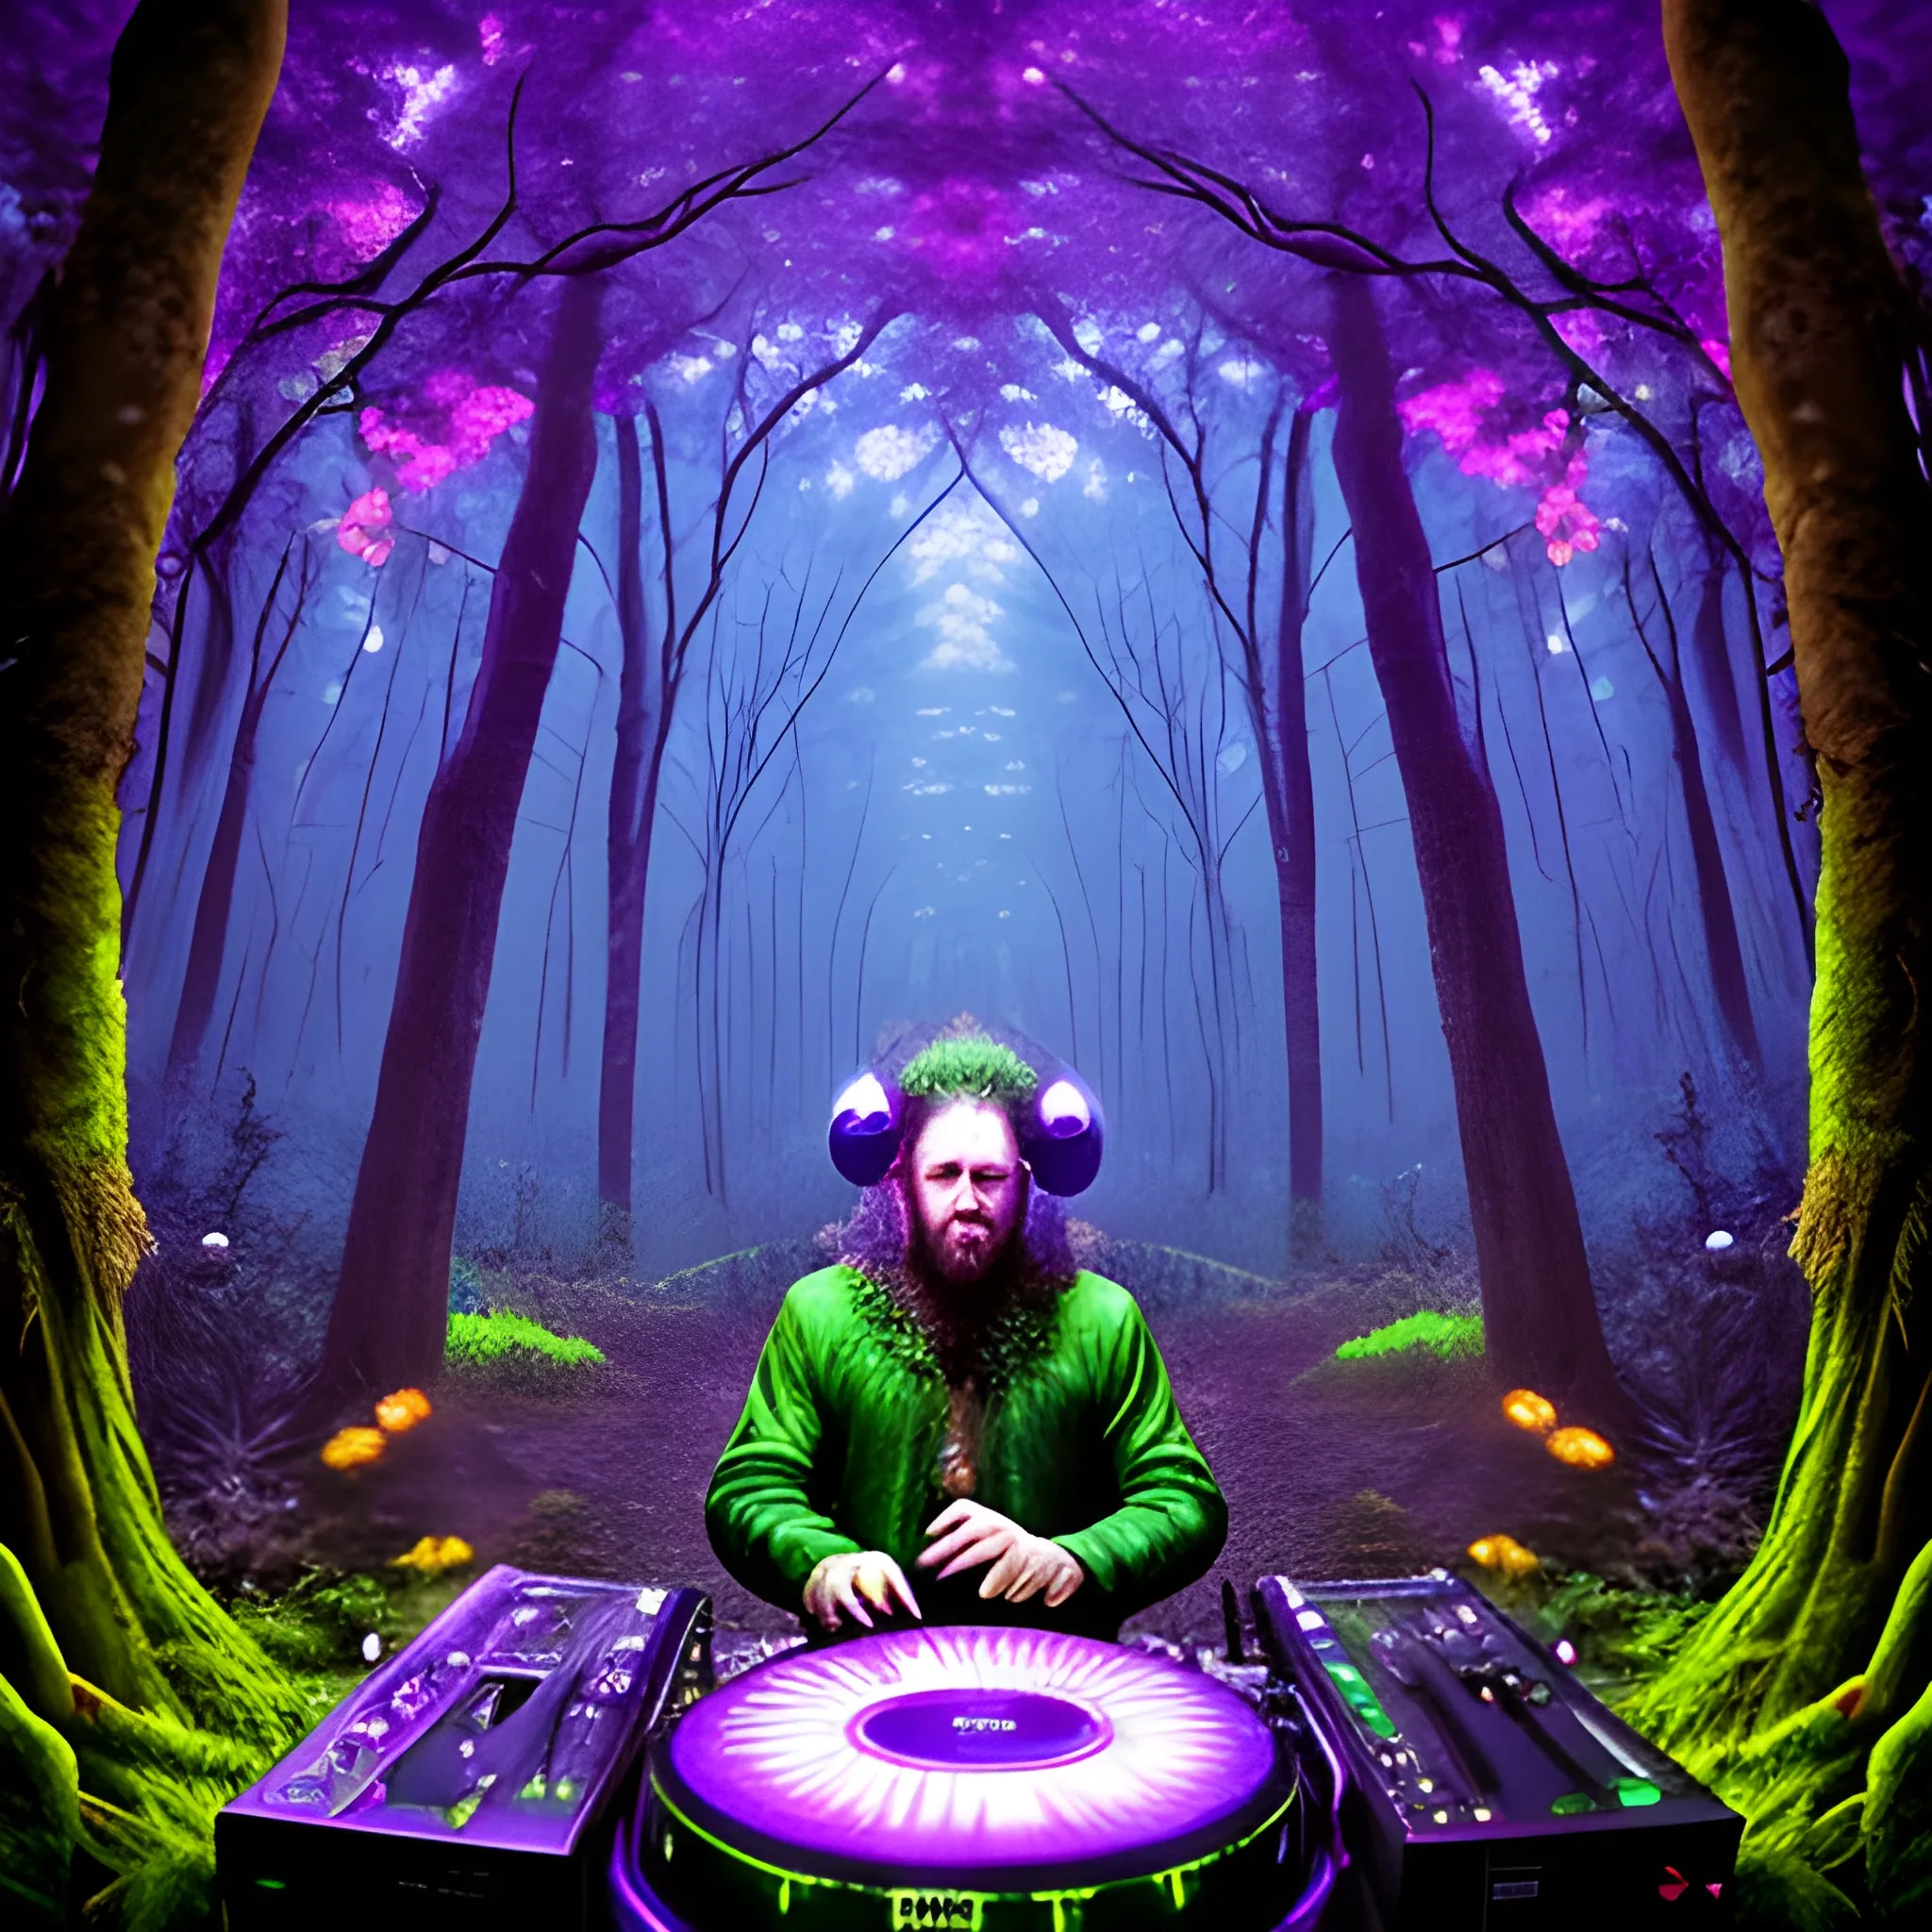 In the heart of the enchanted forest, the DJ conjures melodies that lure mythical creatures from hibernation. The drums' resounding pulse harmonizes with the whispers of trees, creating an otherworldly symphony. Lose yourself in nature's most mesmerizing dance., Trippy